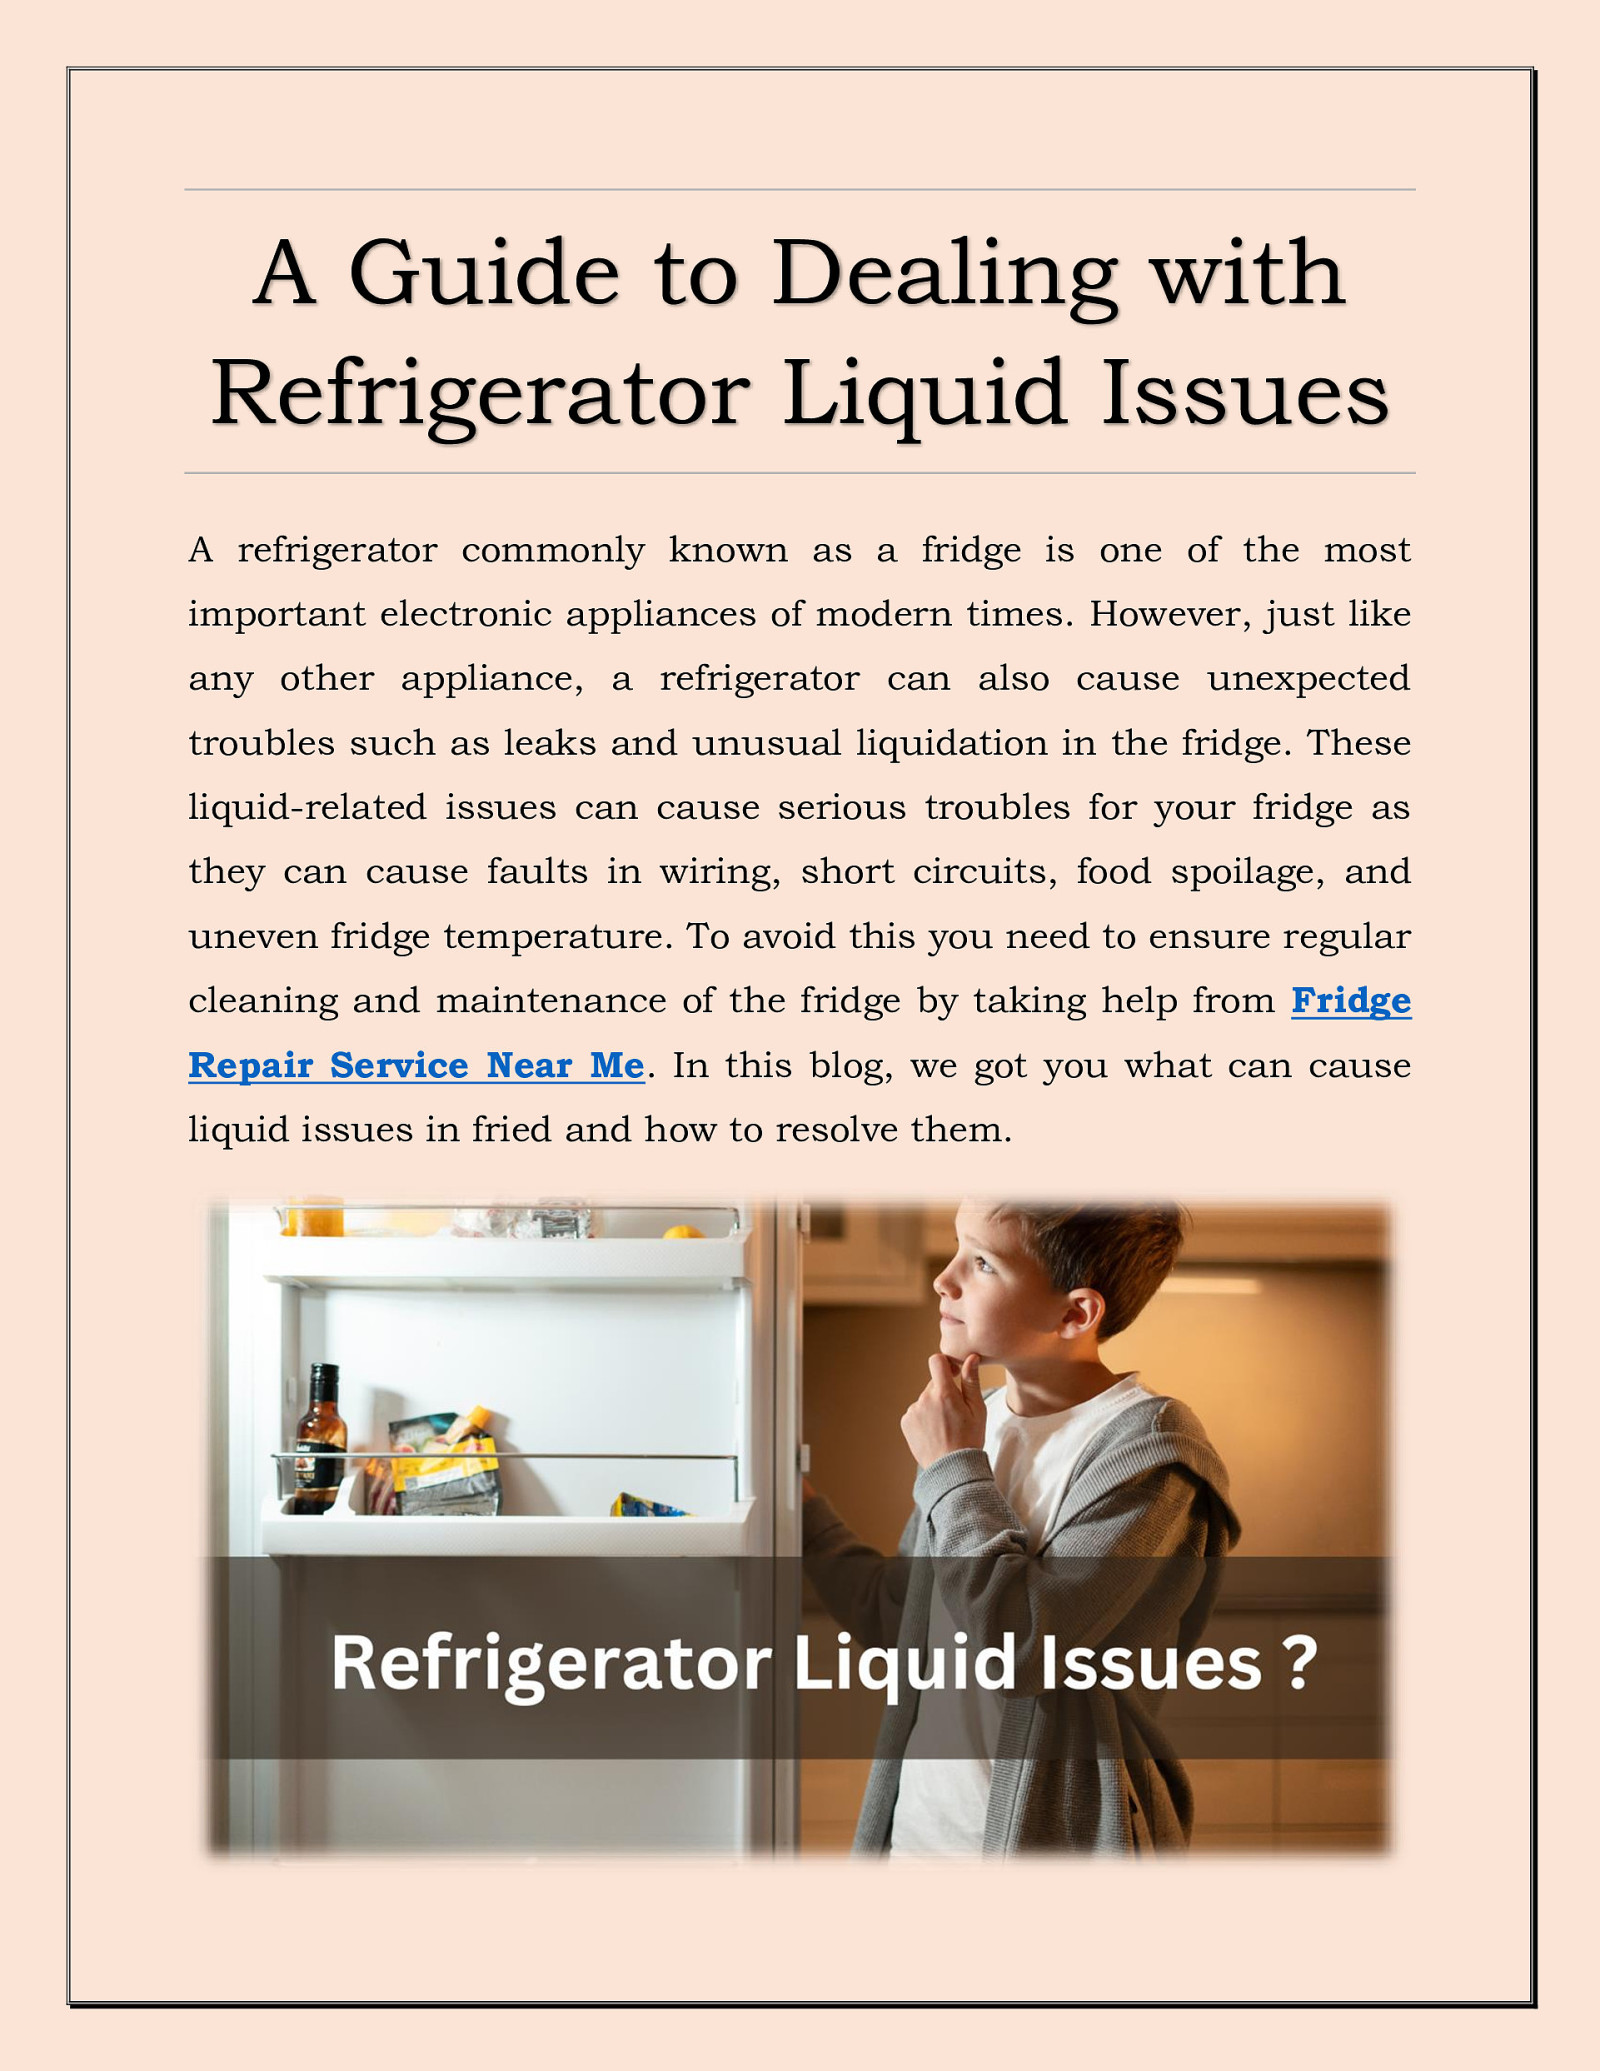 A Guide to Dealing with Refrigerator Liquid Issues